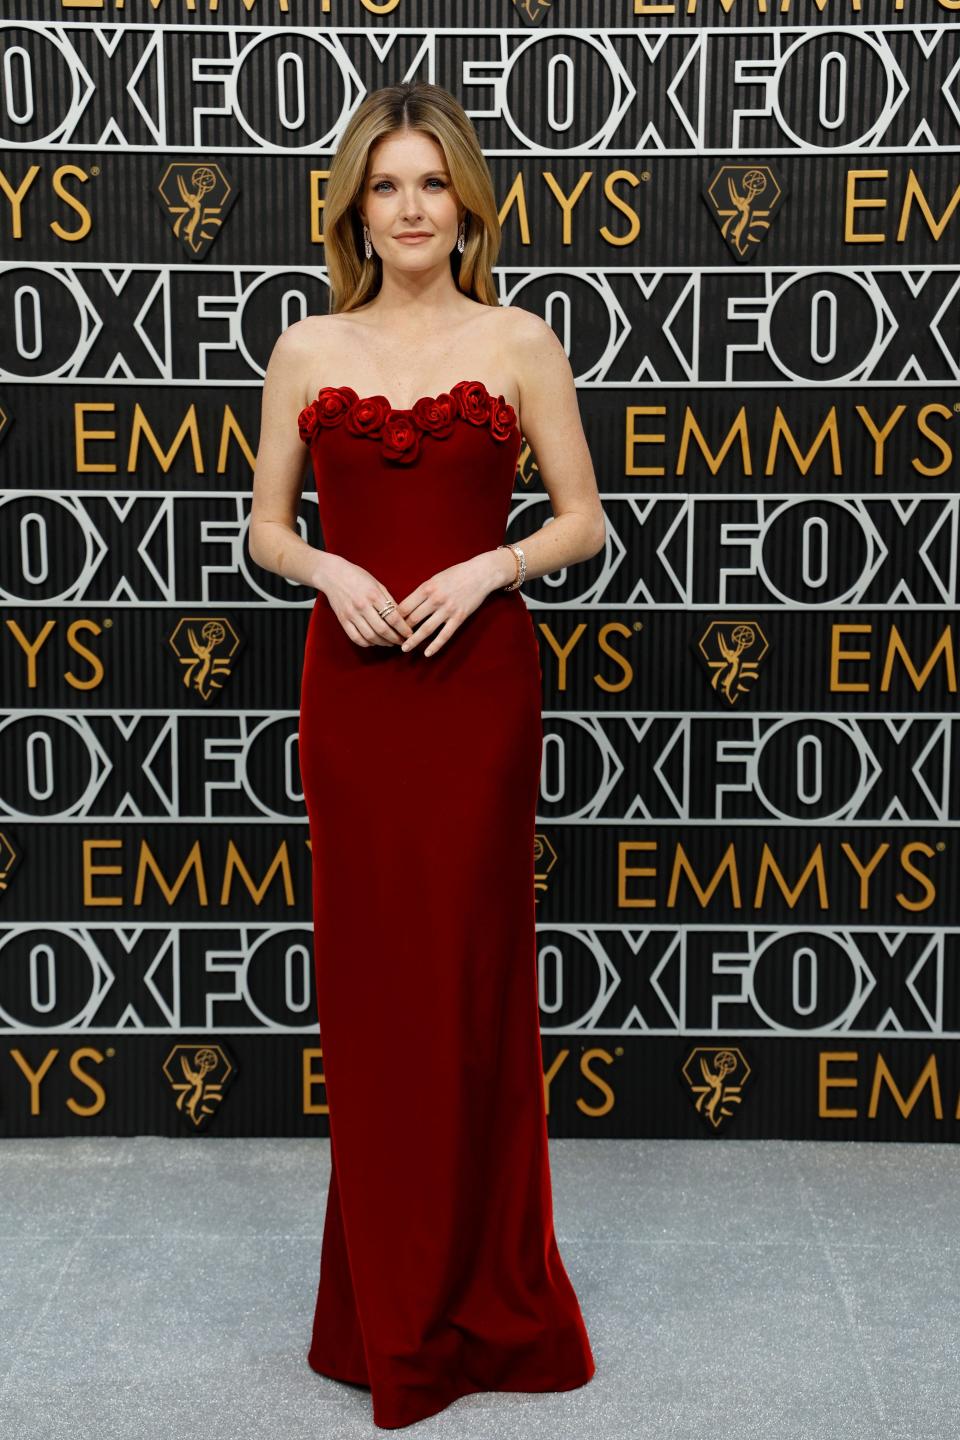 Meghann Fahy can do wrong and her Emmys fashion look proved that fact.